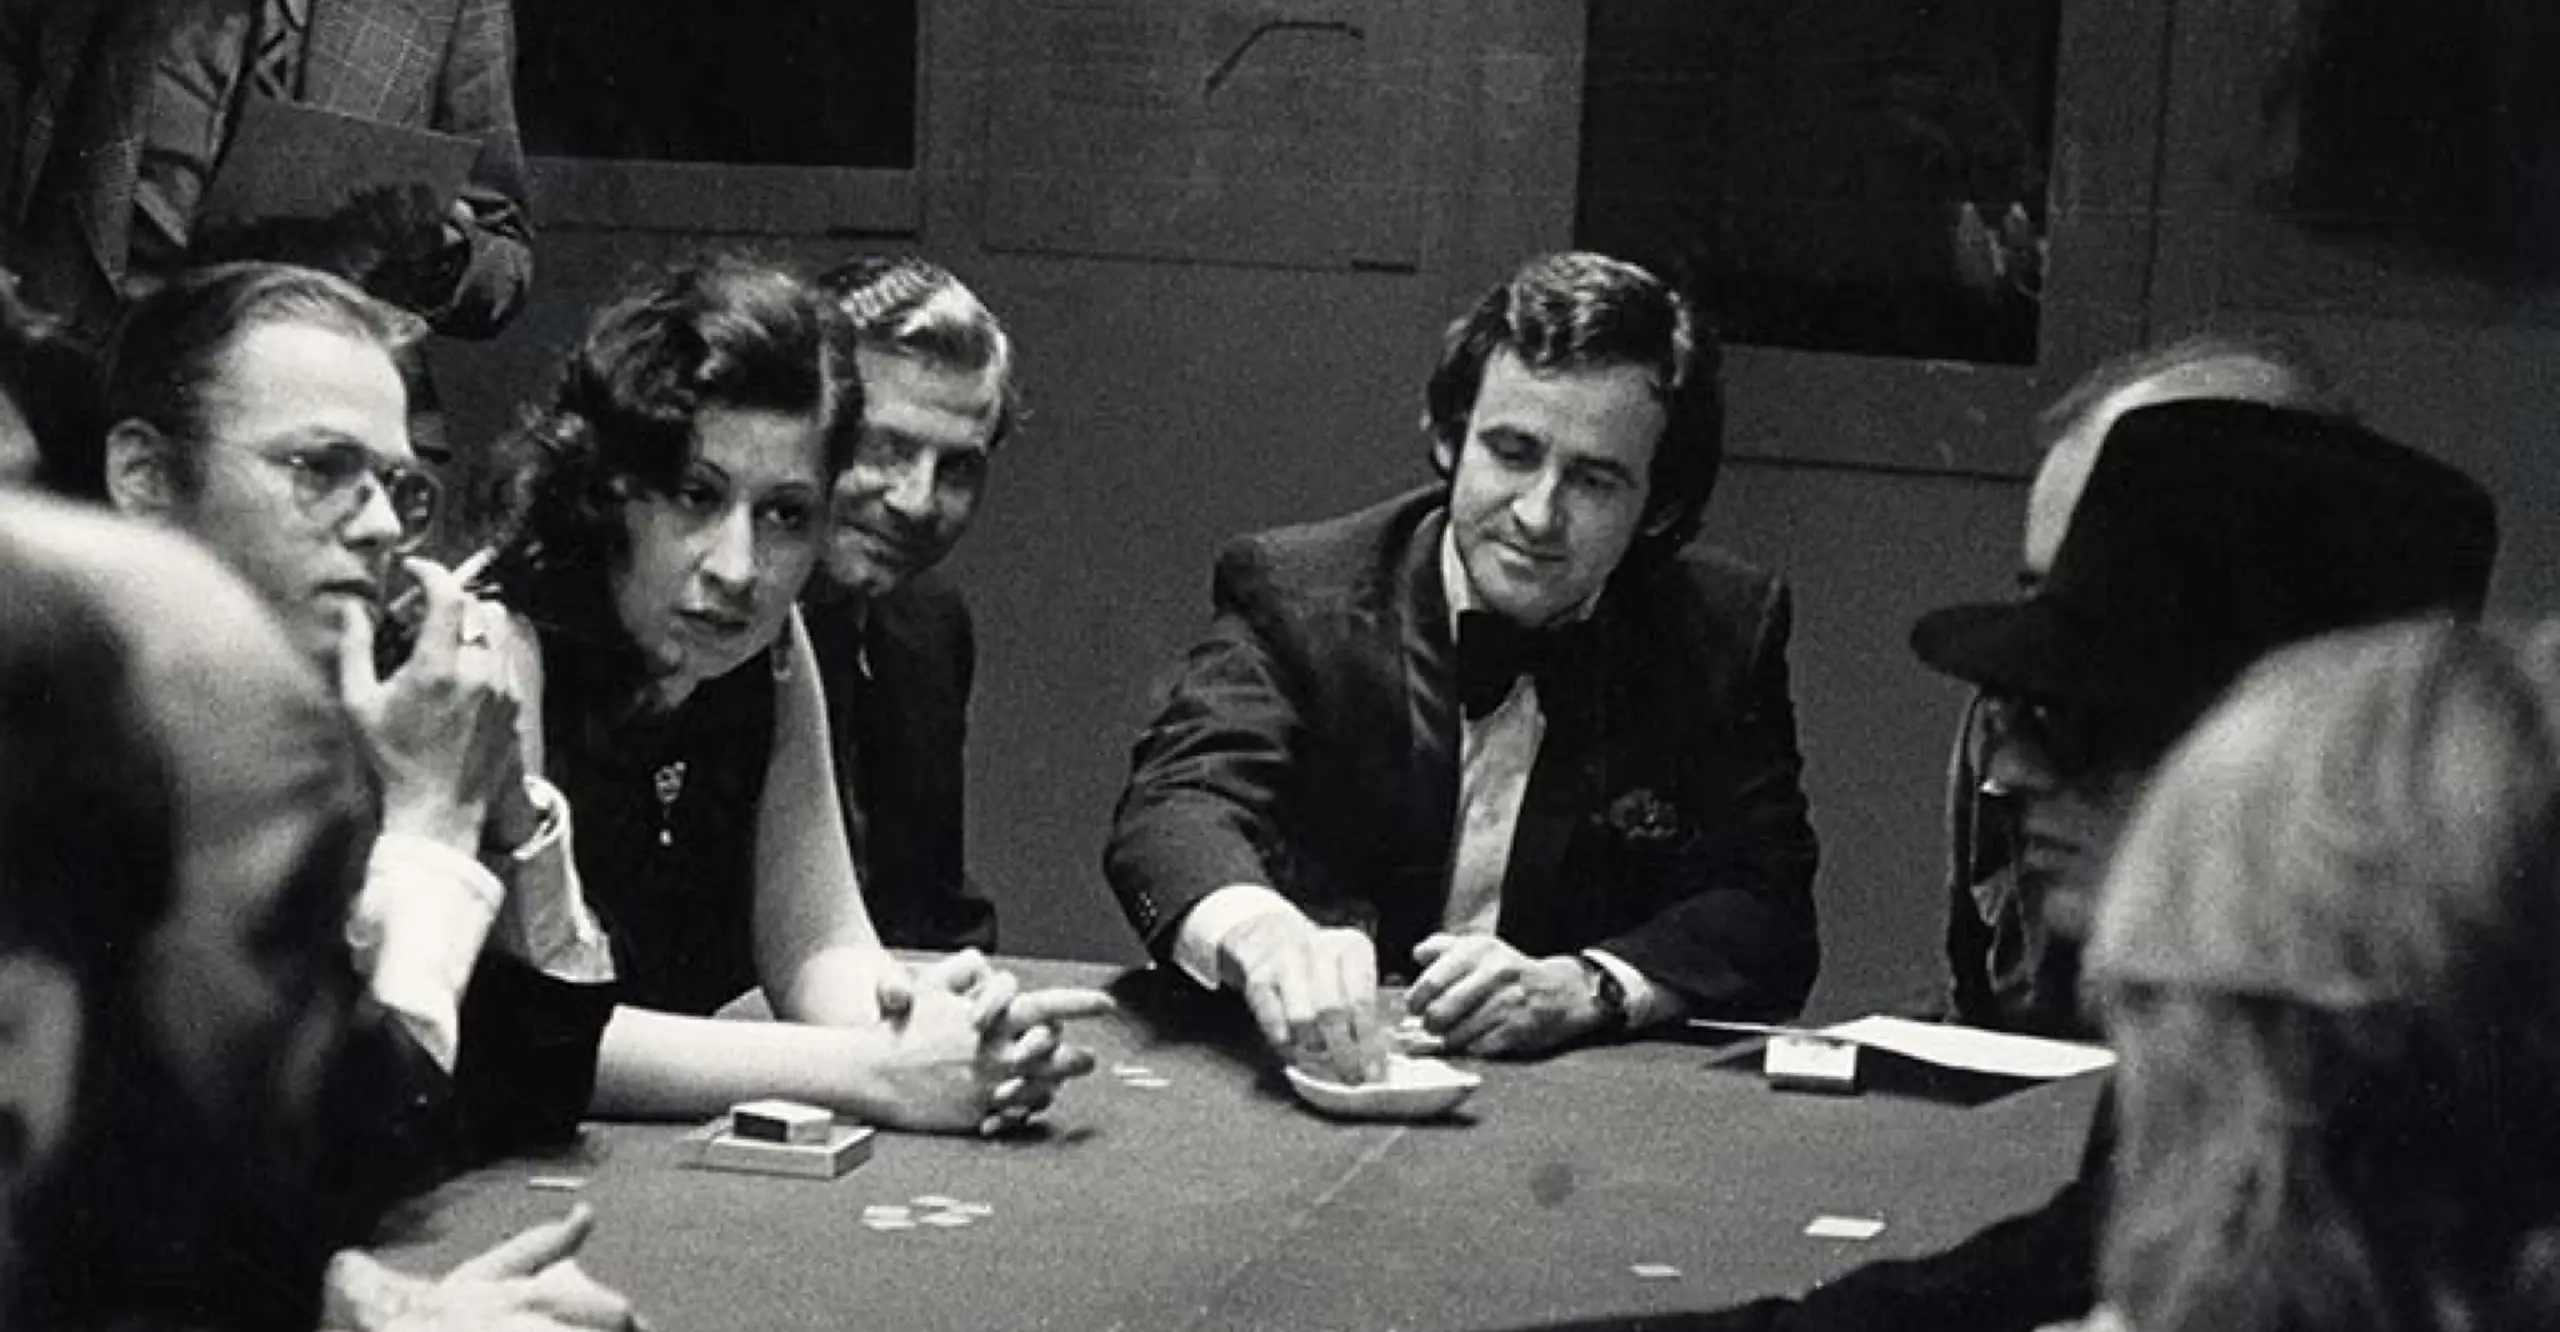 Black and white image featuring eight people seated around a round table playing cards